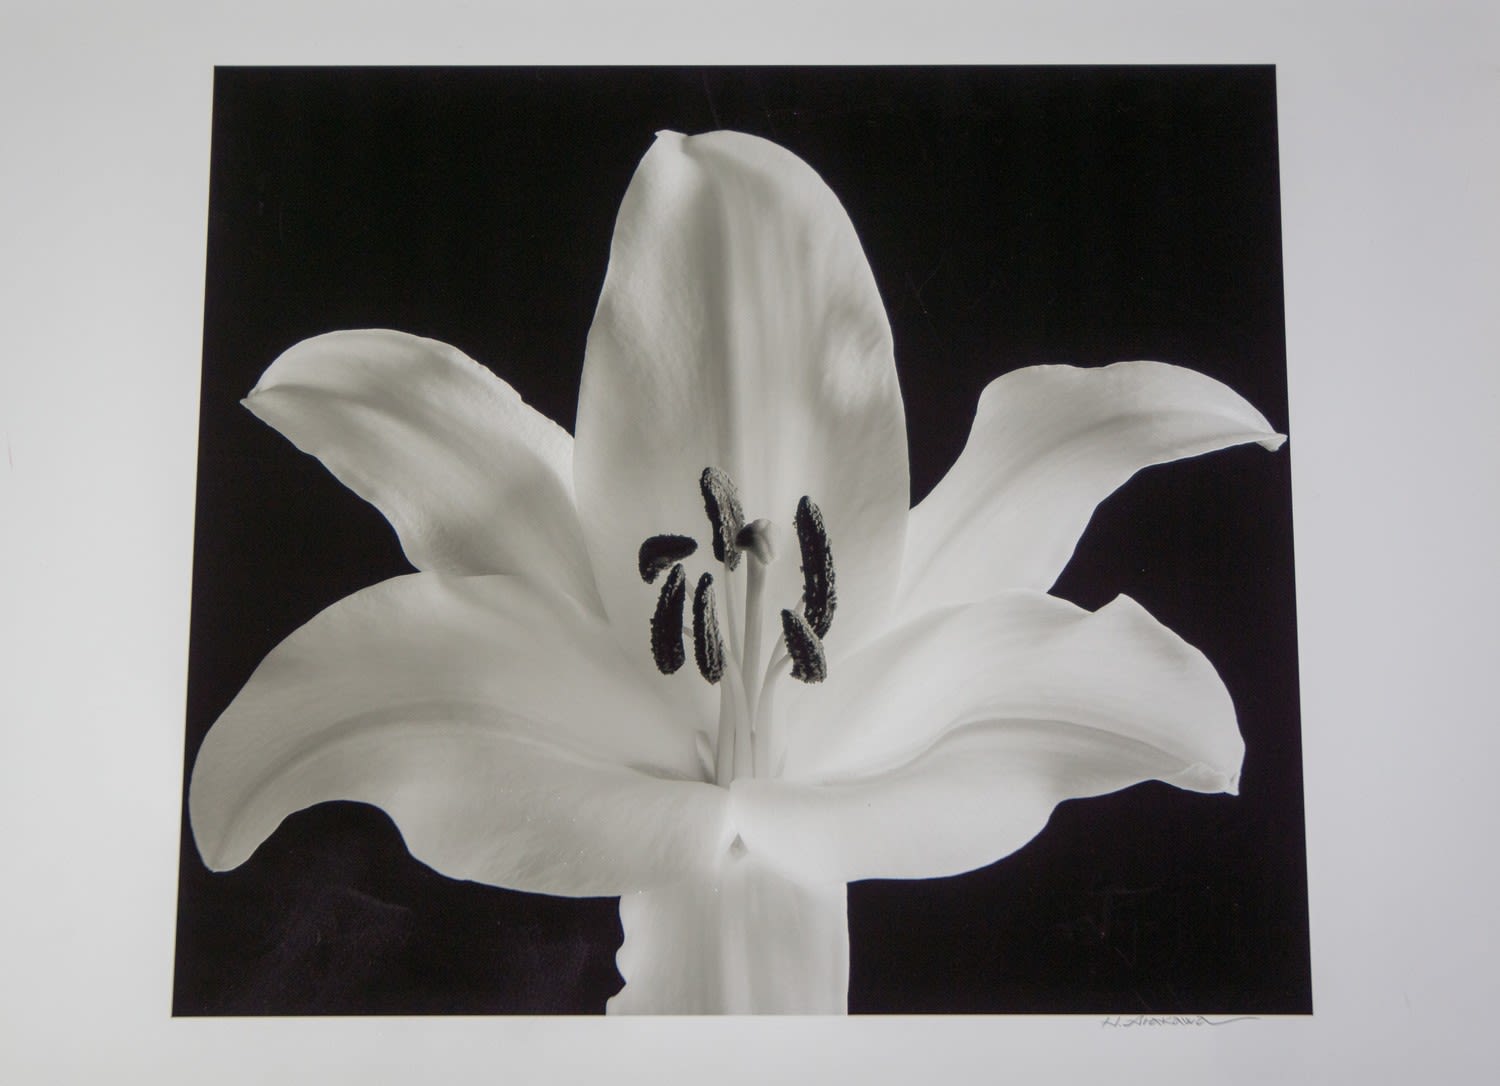 H Arakawa. Flower photograph on heavy paper, signed. Approx 43x60cm F2